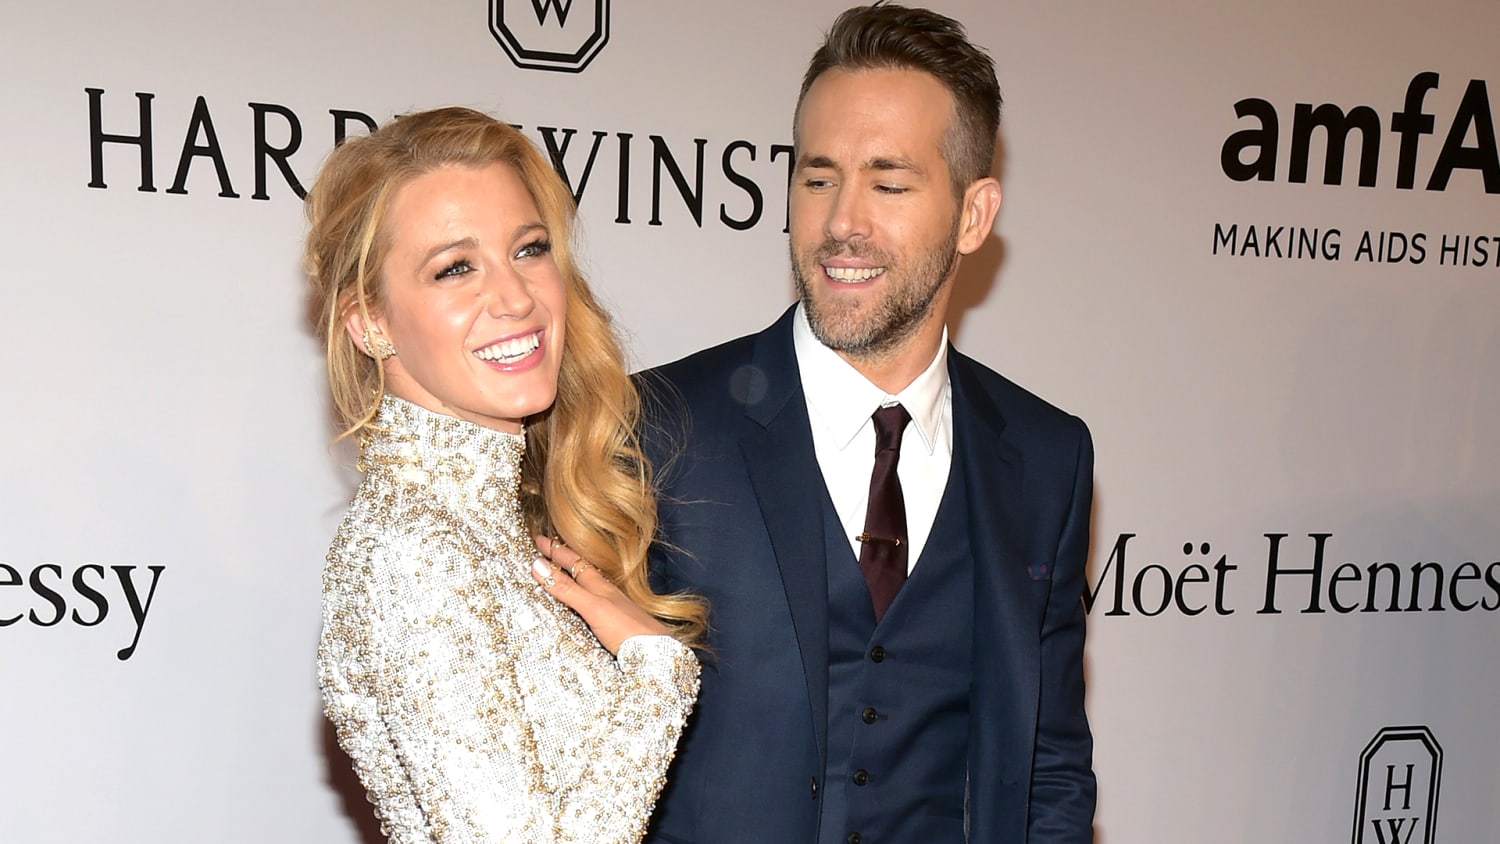 Blake Lively opens up about Ryan Reynolds as a dad - TODAY.com1920 x 1080